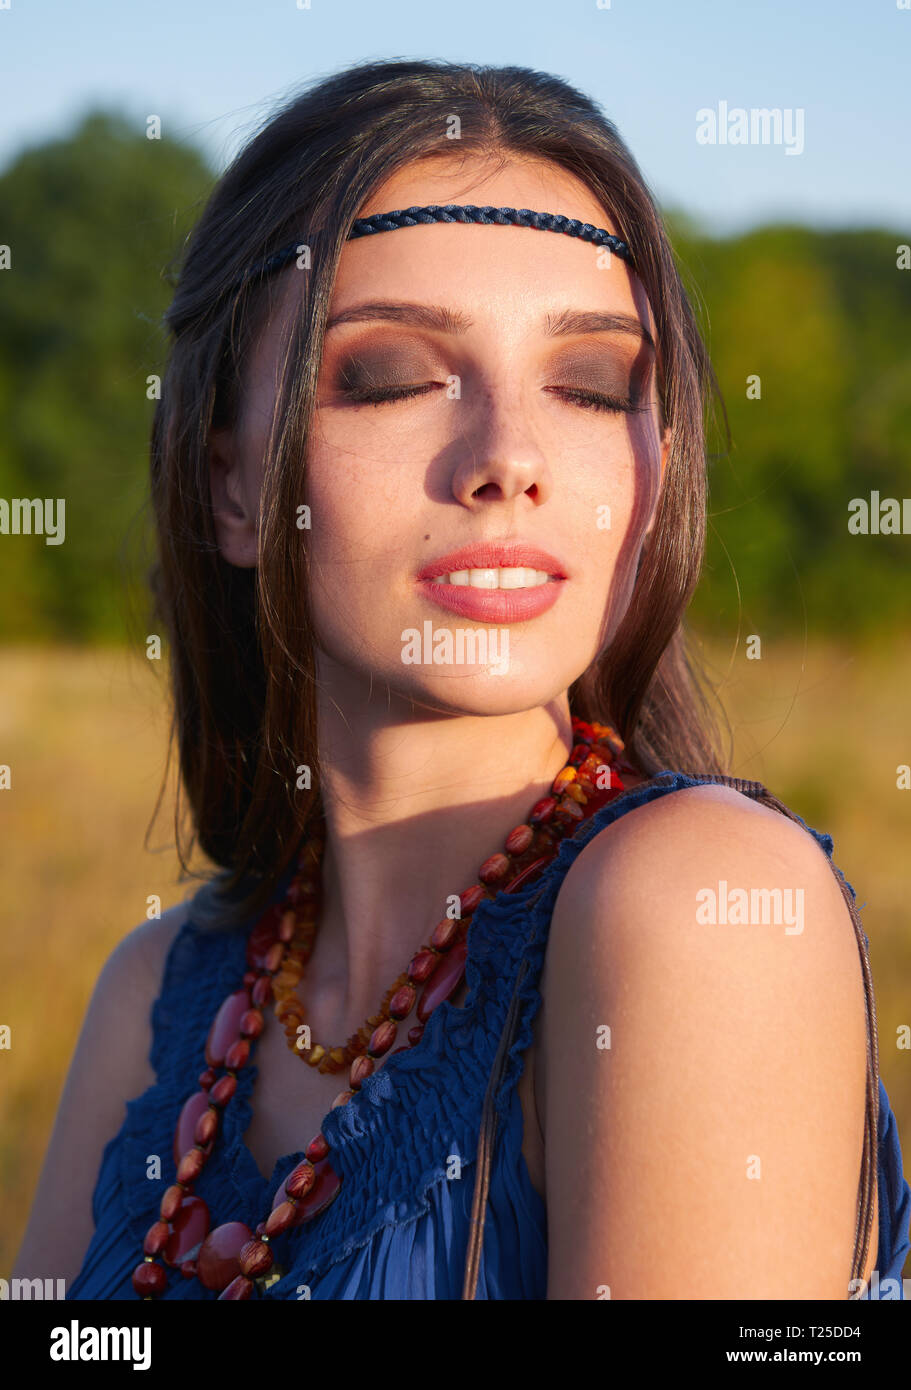 Close-up outdoor portrait of the lovely young boho (hippie) girl with closed eyes Stock Photo